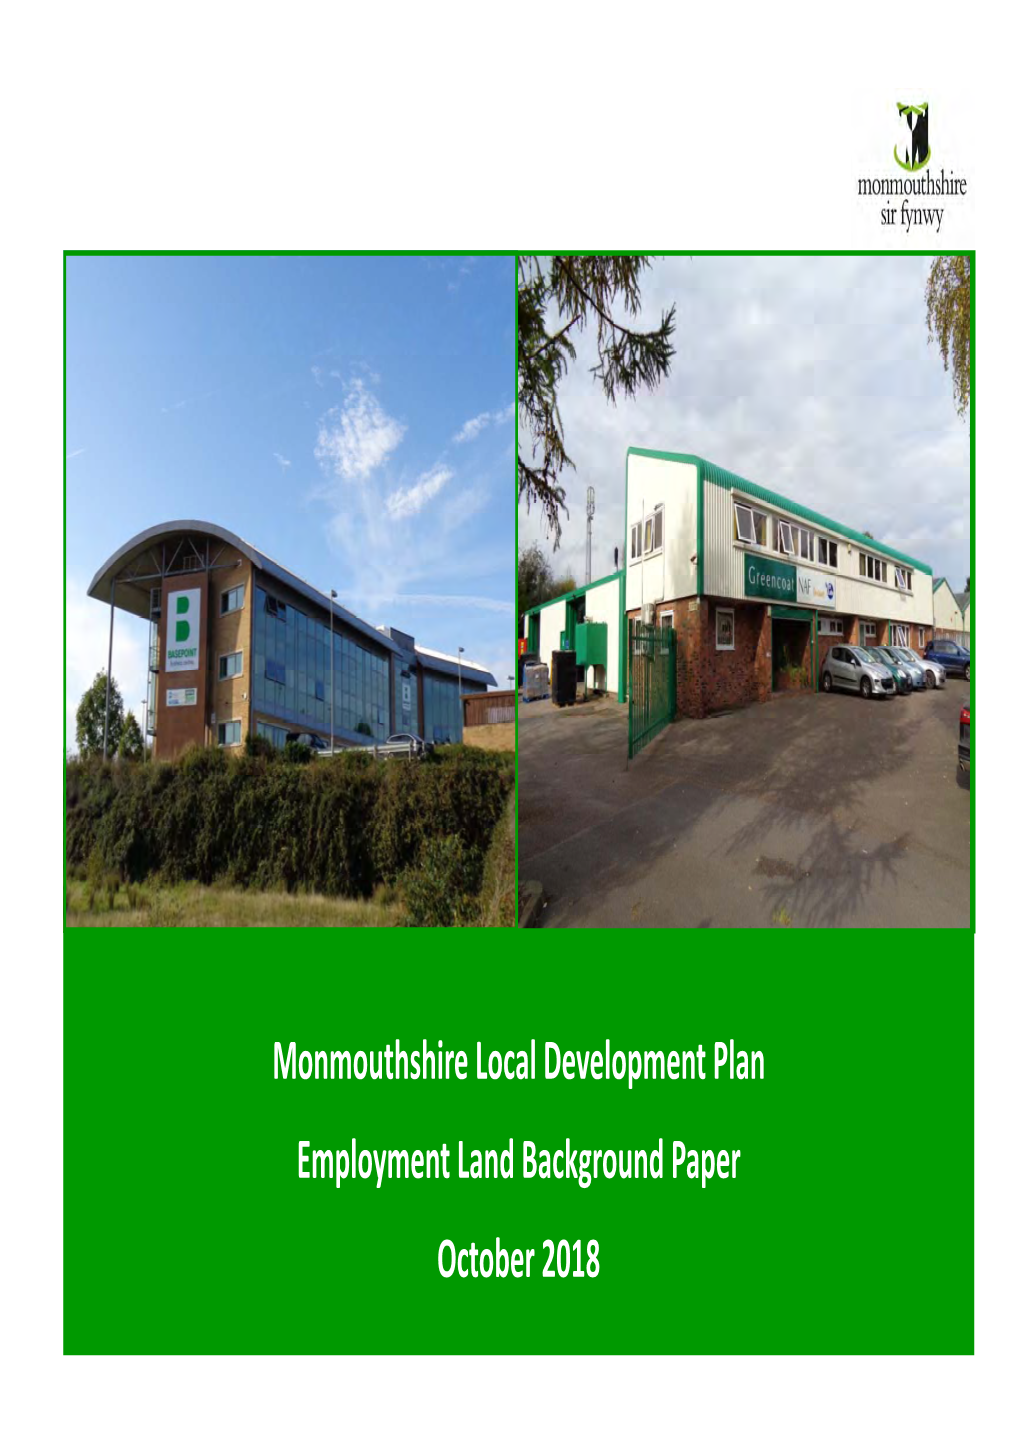 Monmouthshire Local Development Plan Employment Land Background Paper October 2018